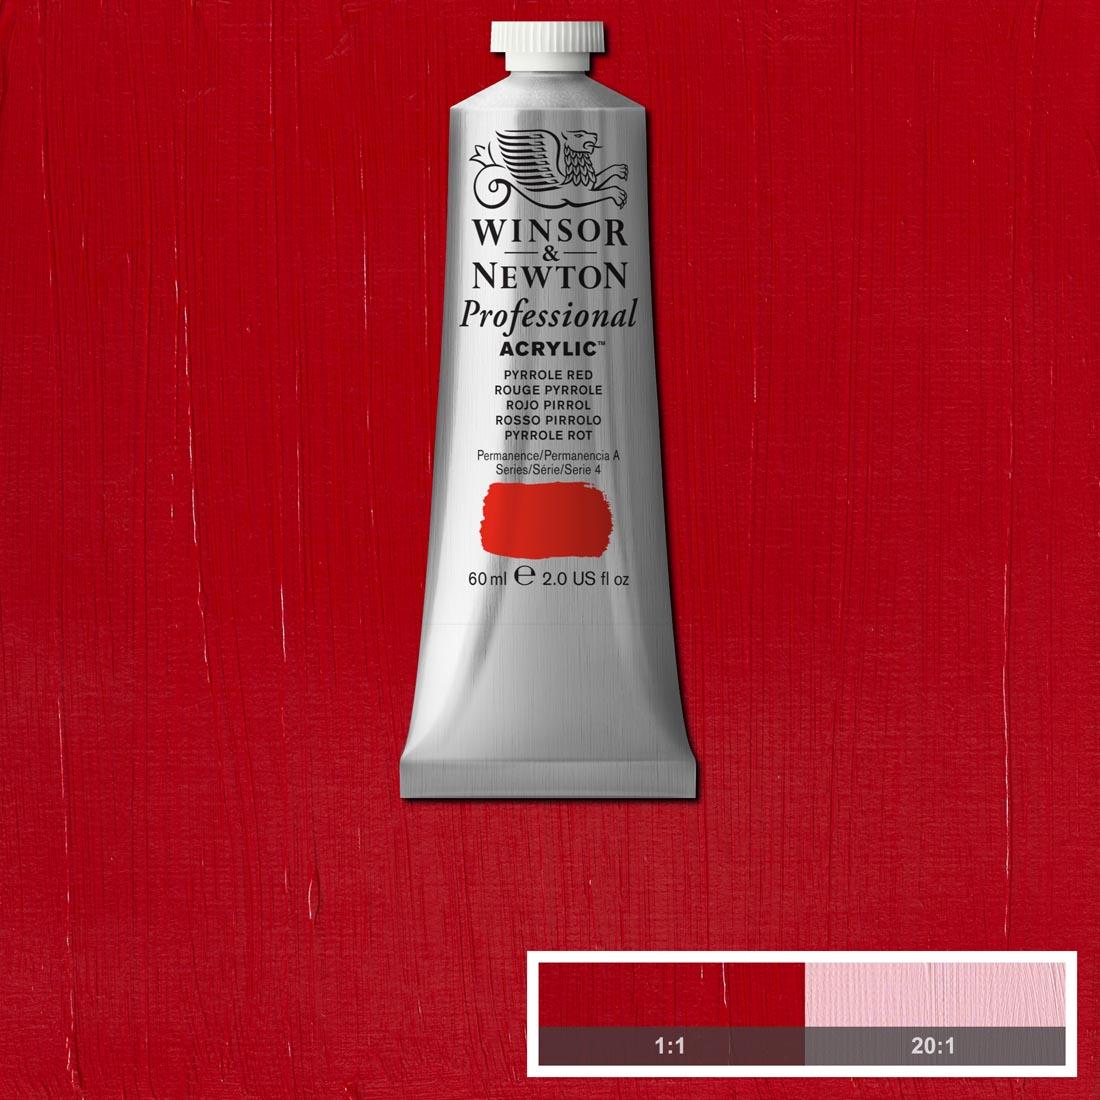 Tube of Pyrrole Red Winsor and Newton Professional Acrylic with paint swatch in the background